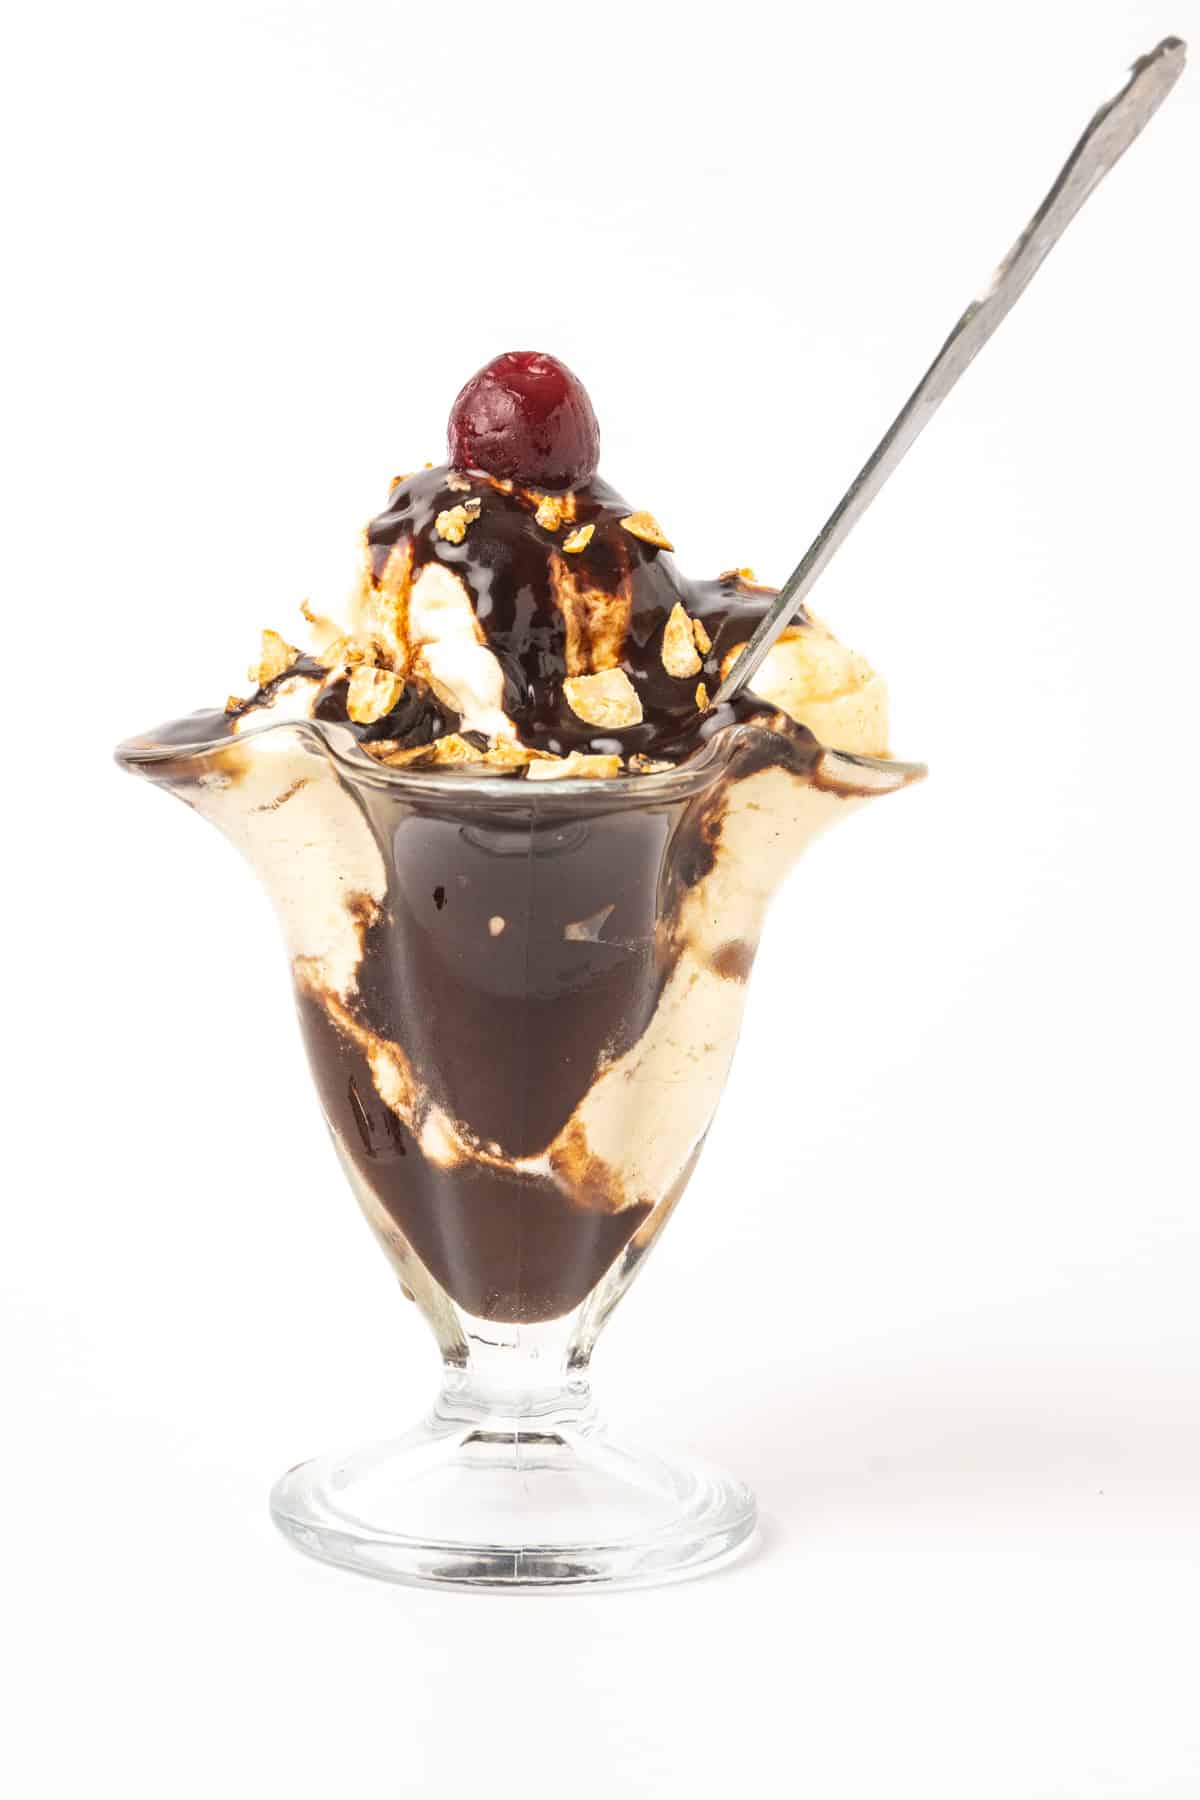 A vegan sundae with vanilla ice cream, hot fudge sauce, candied nuts and a cherry on top, served with a long dessert spoon..